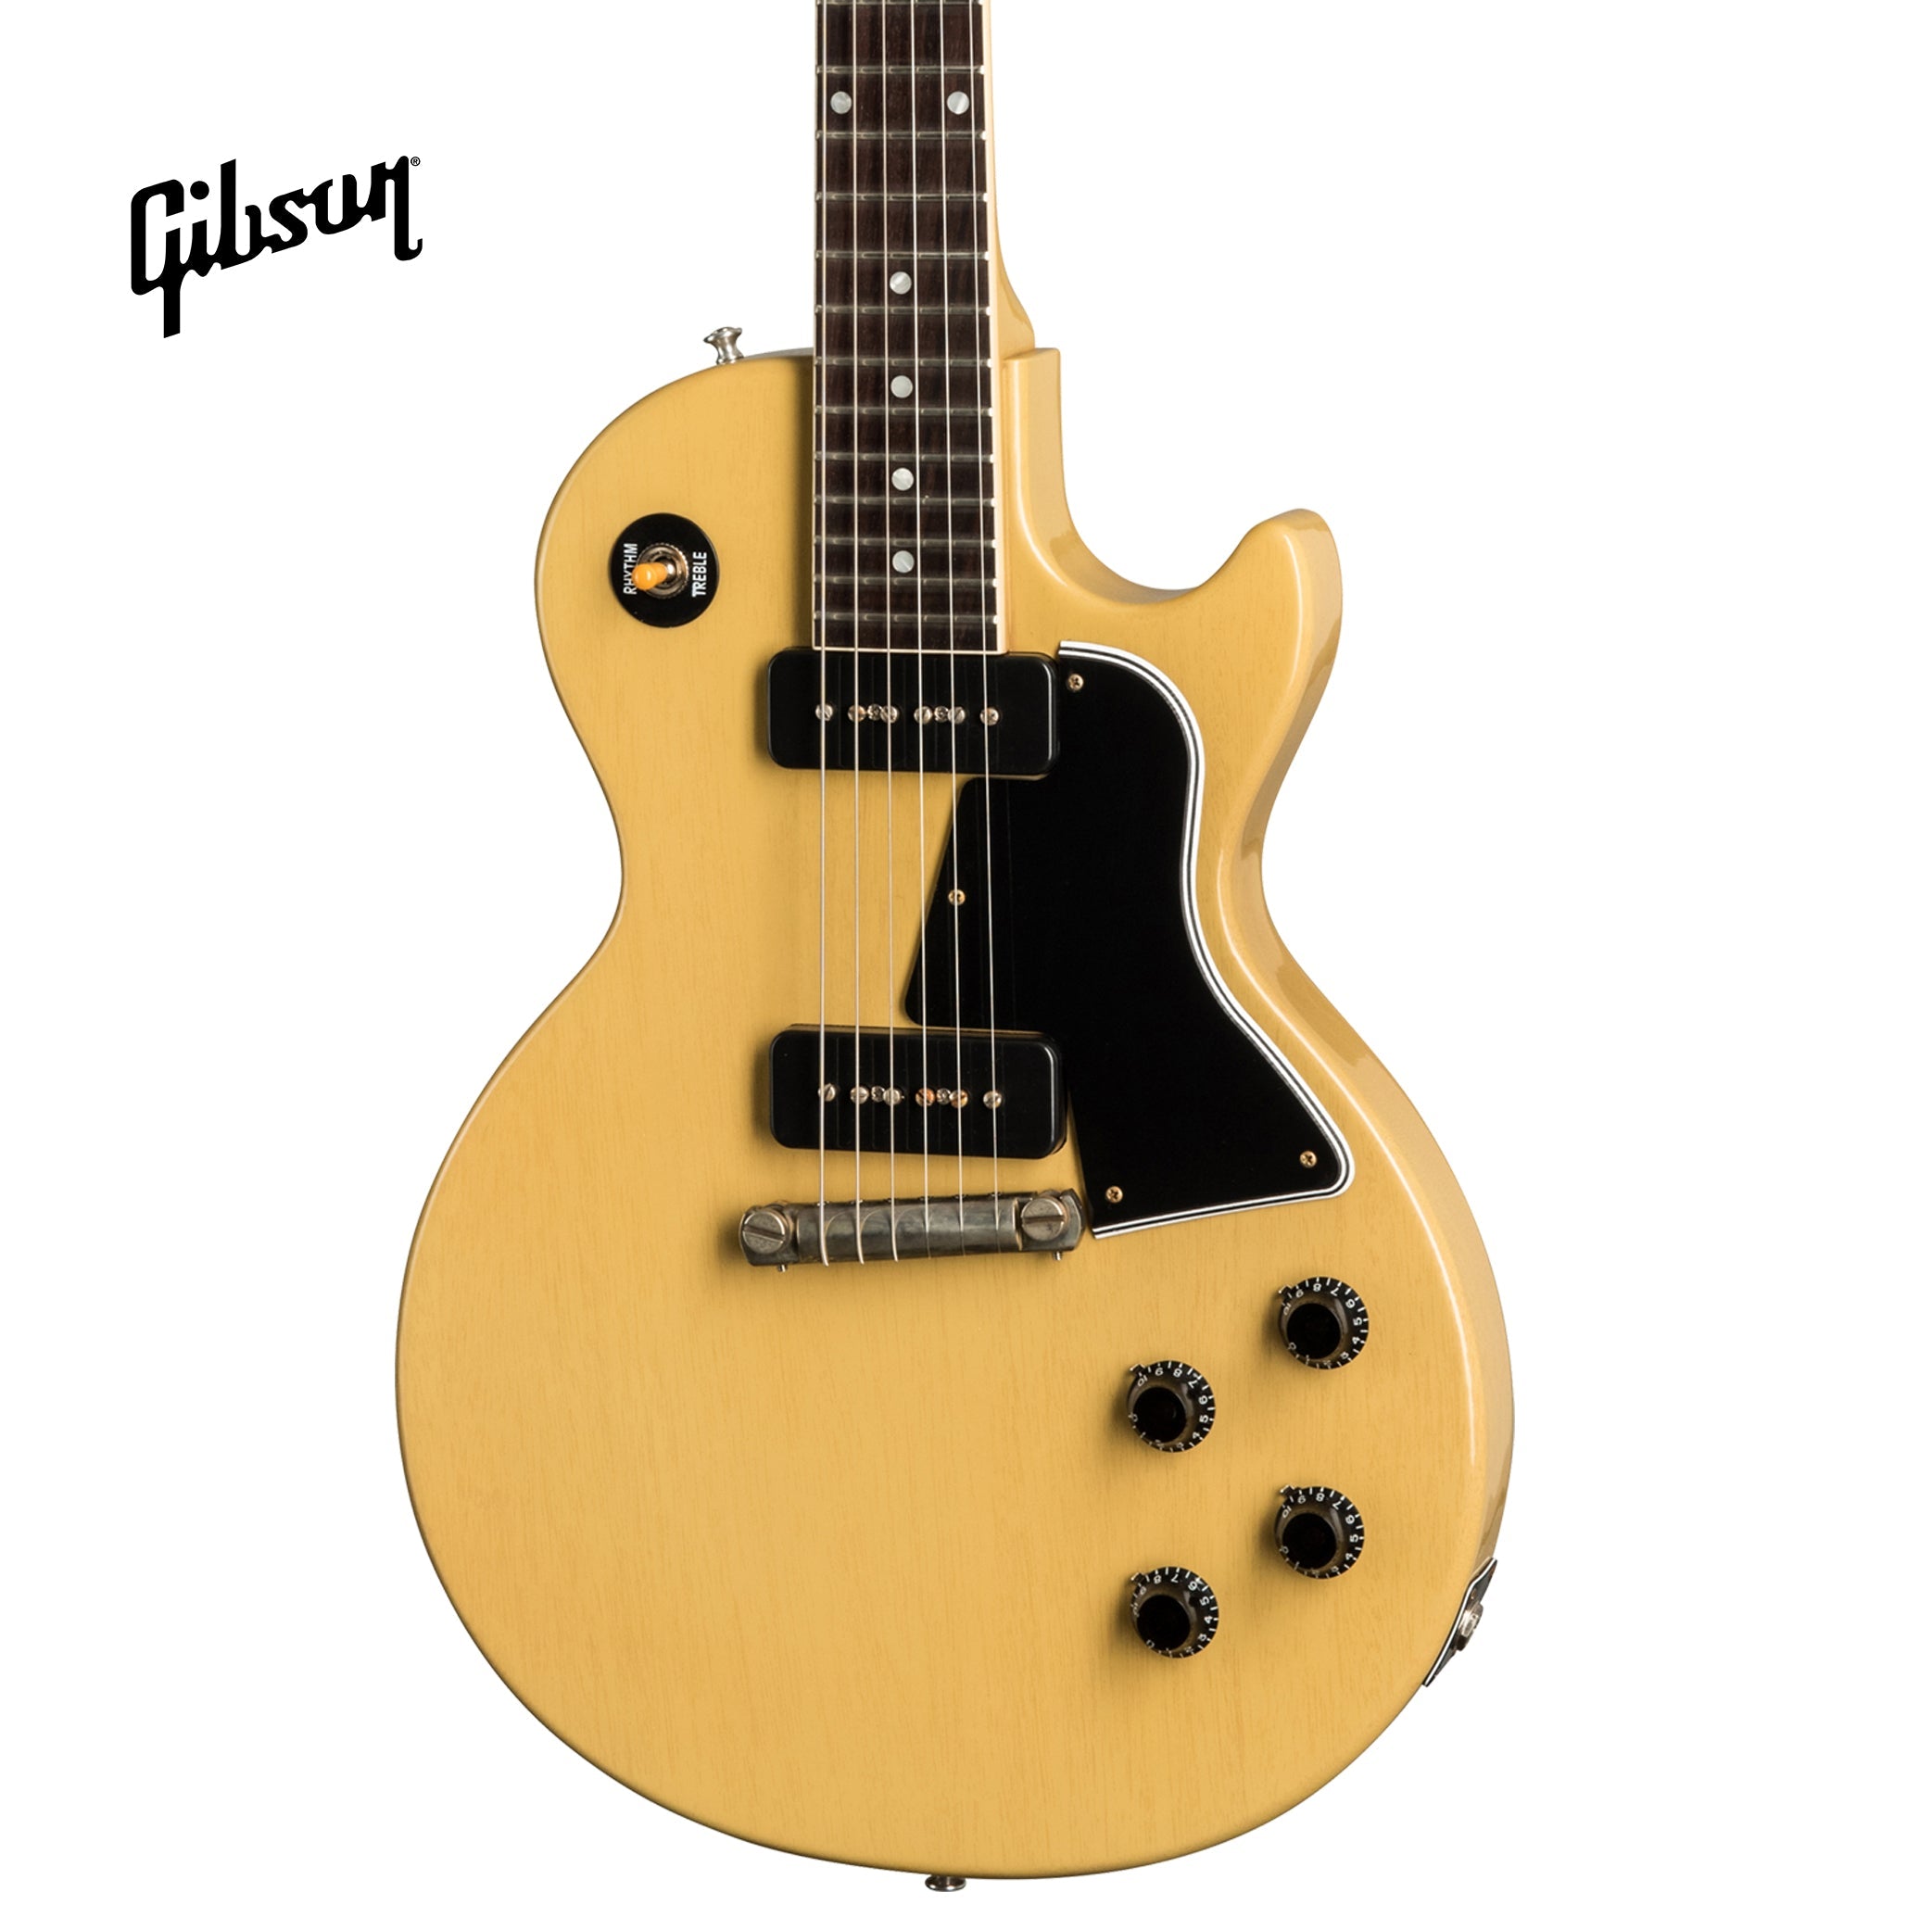 GIBSON 1957 LES PAUL SPECIAL SINGLE CUT REISSUE VOS ELECTRIC GUITAR - TV YELLOW